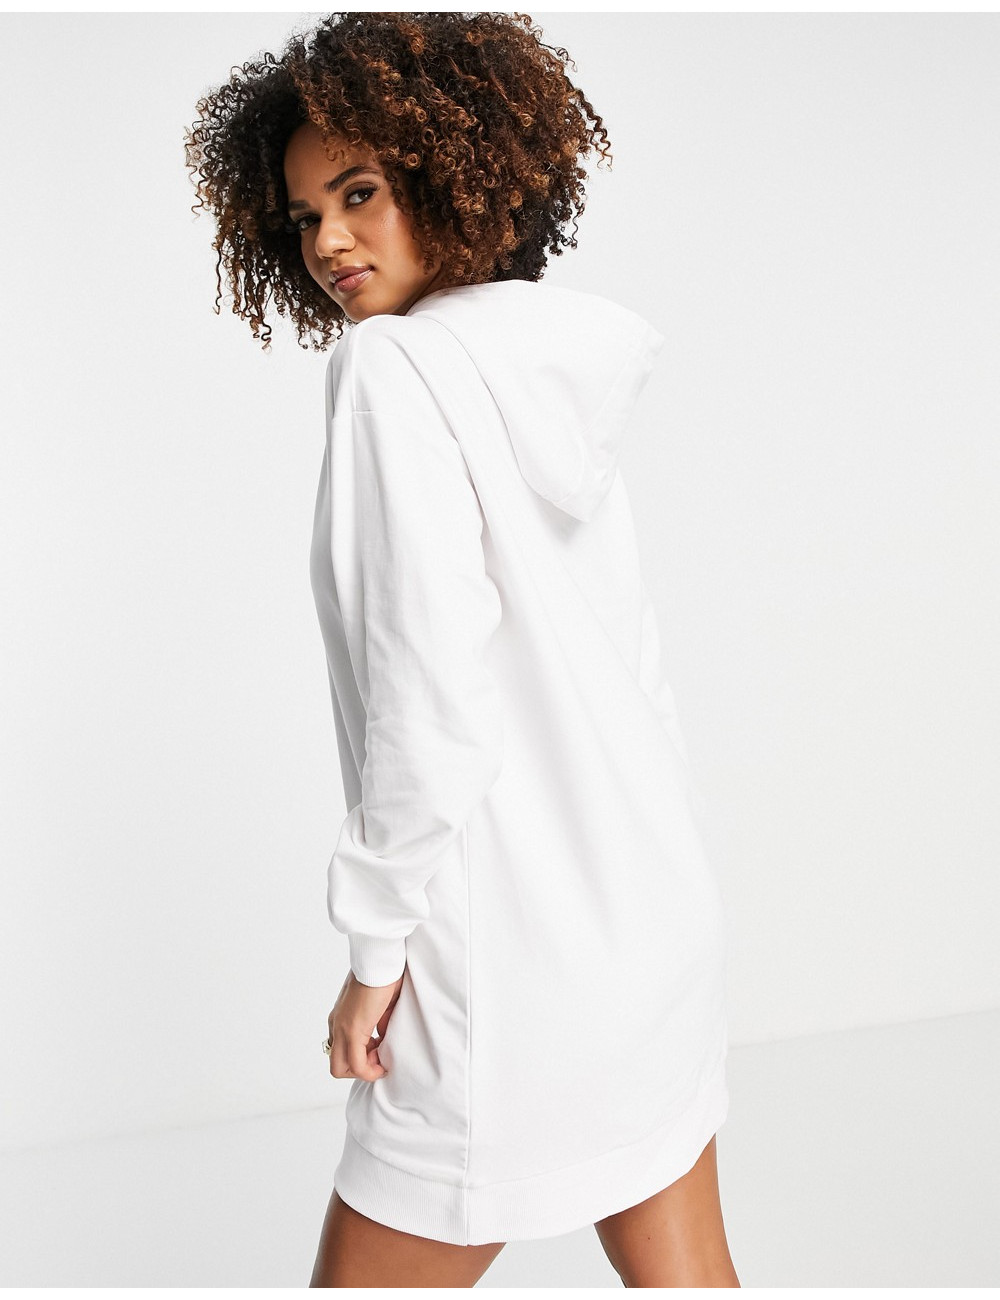 ASYOU hoodie dress in white